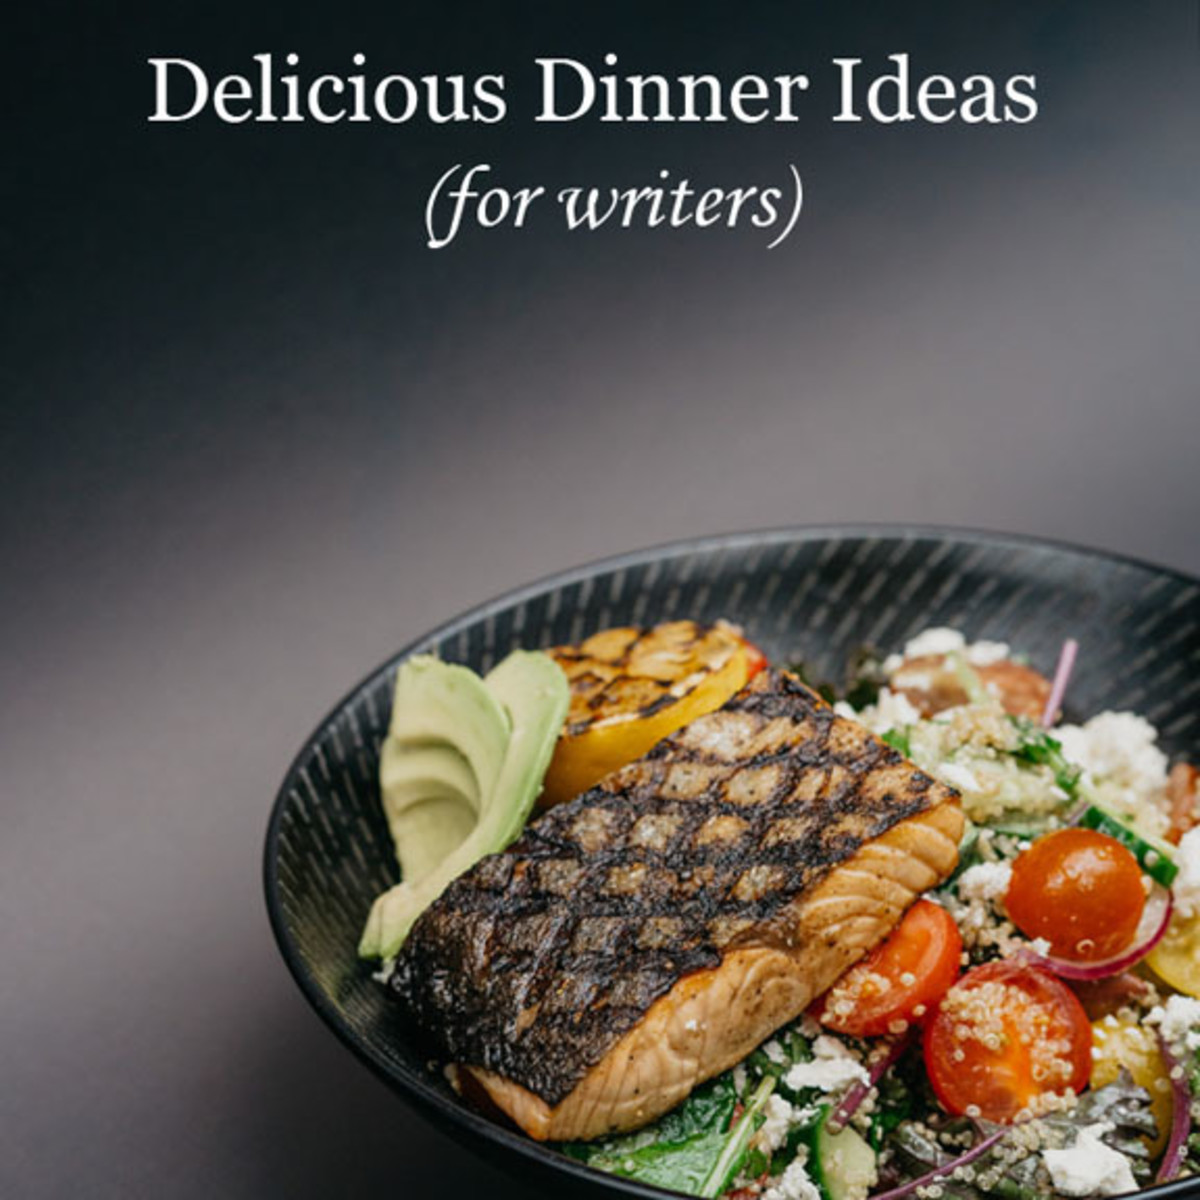 Delicious Dinner Ideas to Use in Your Stories